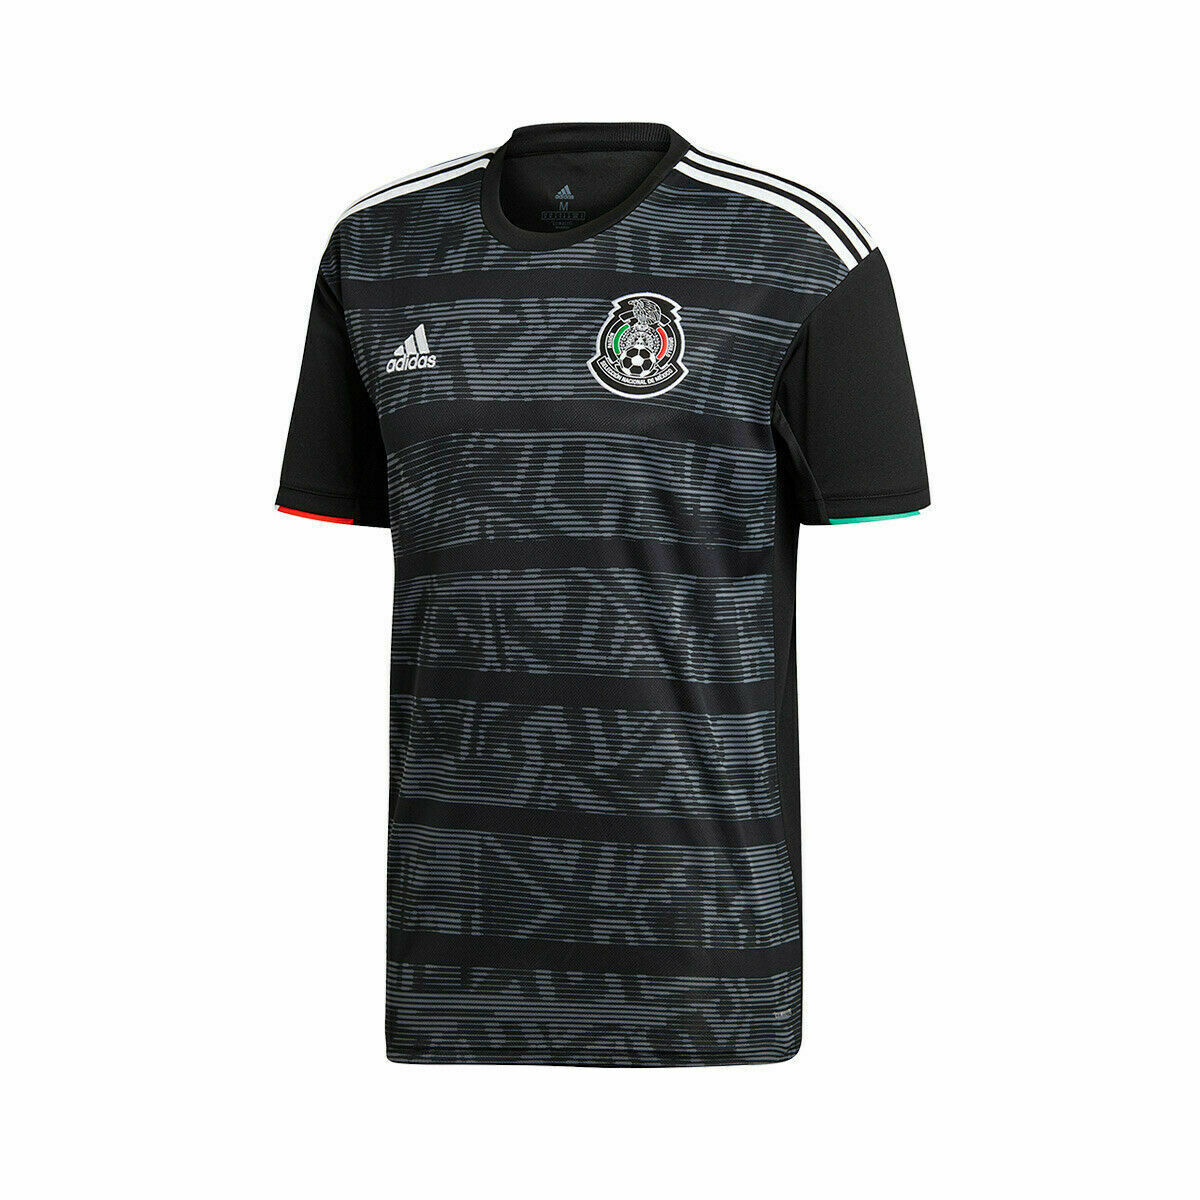 mexico 1998 jersey